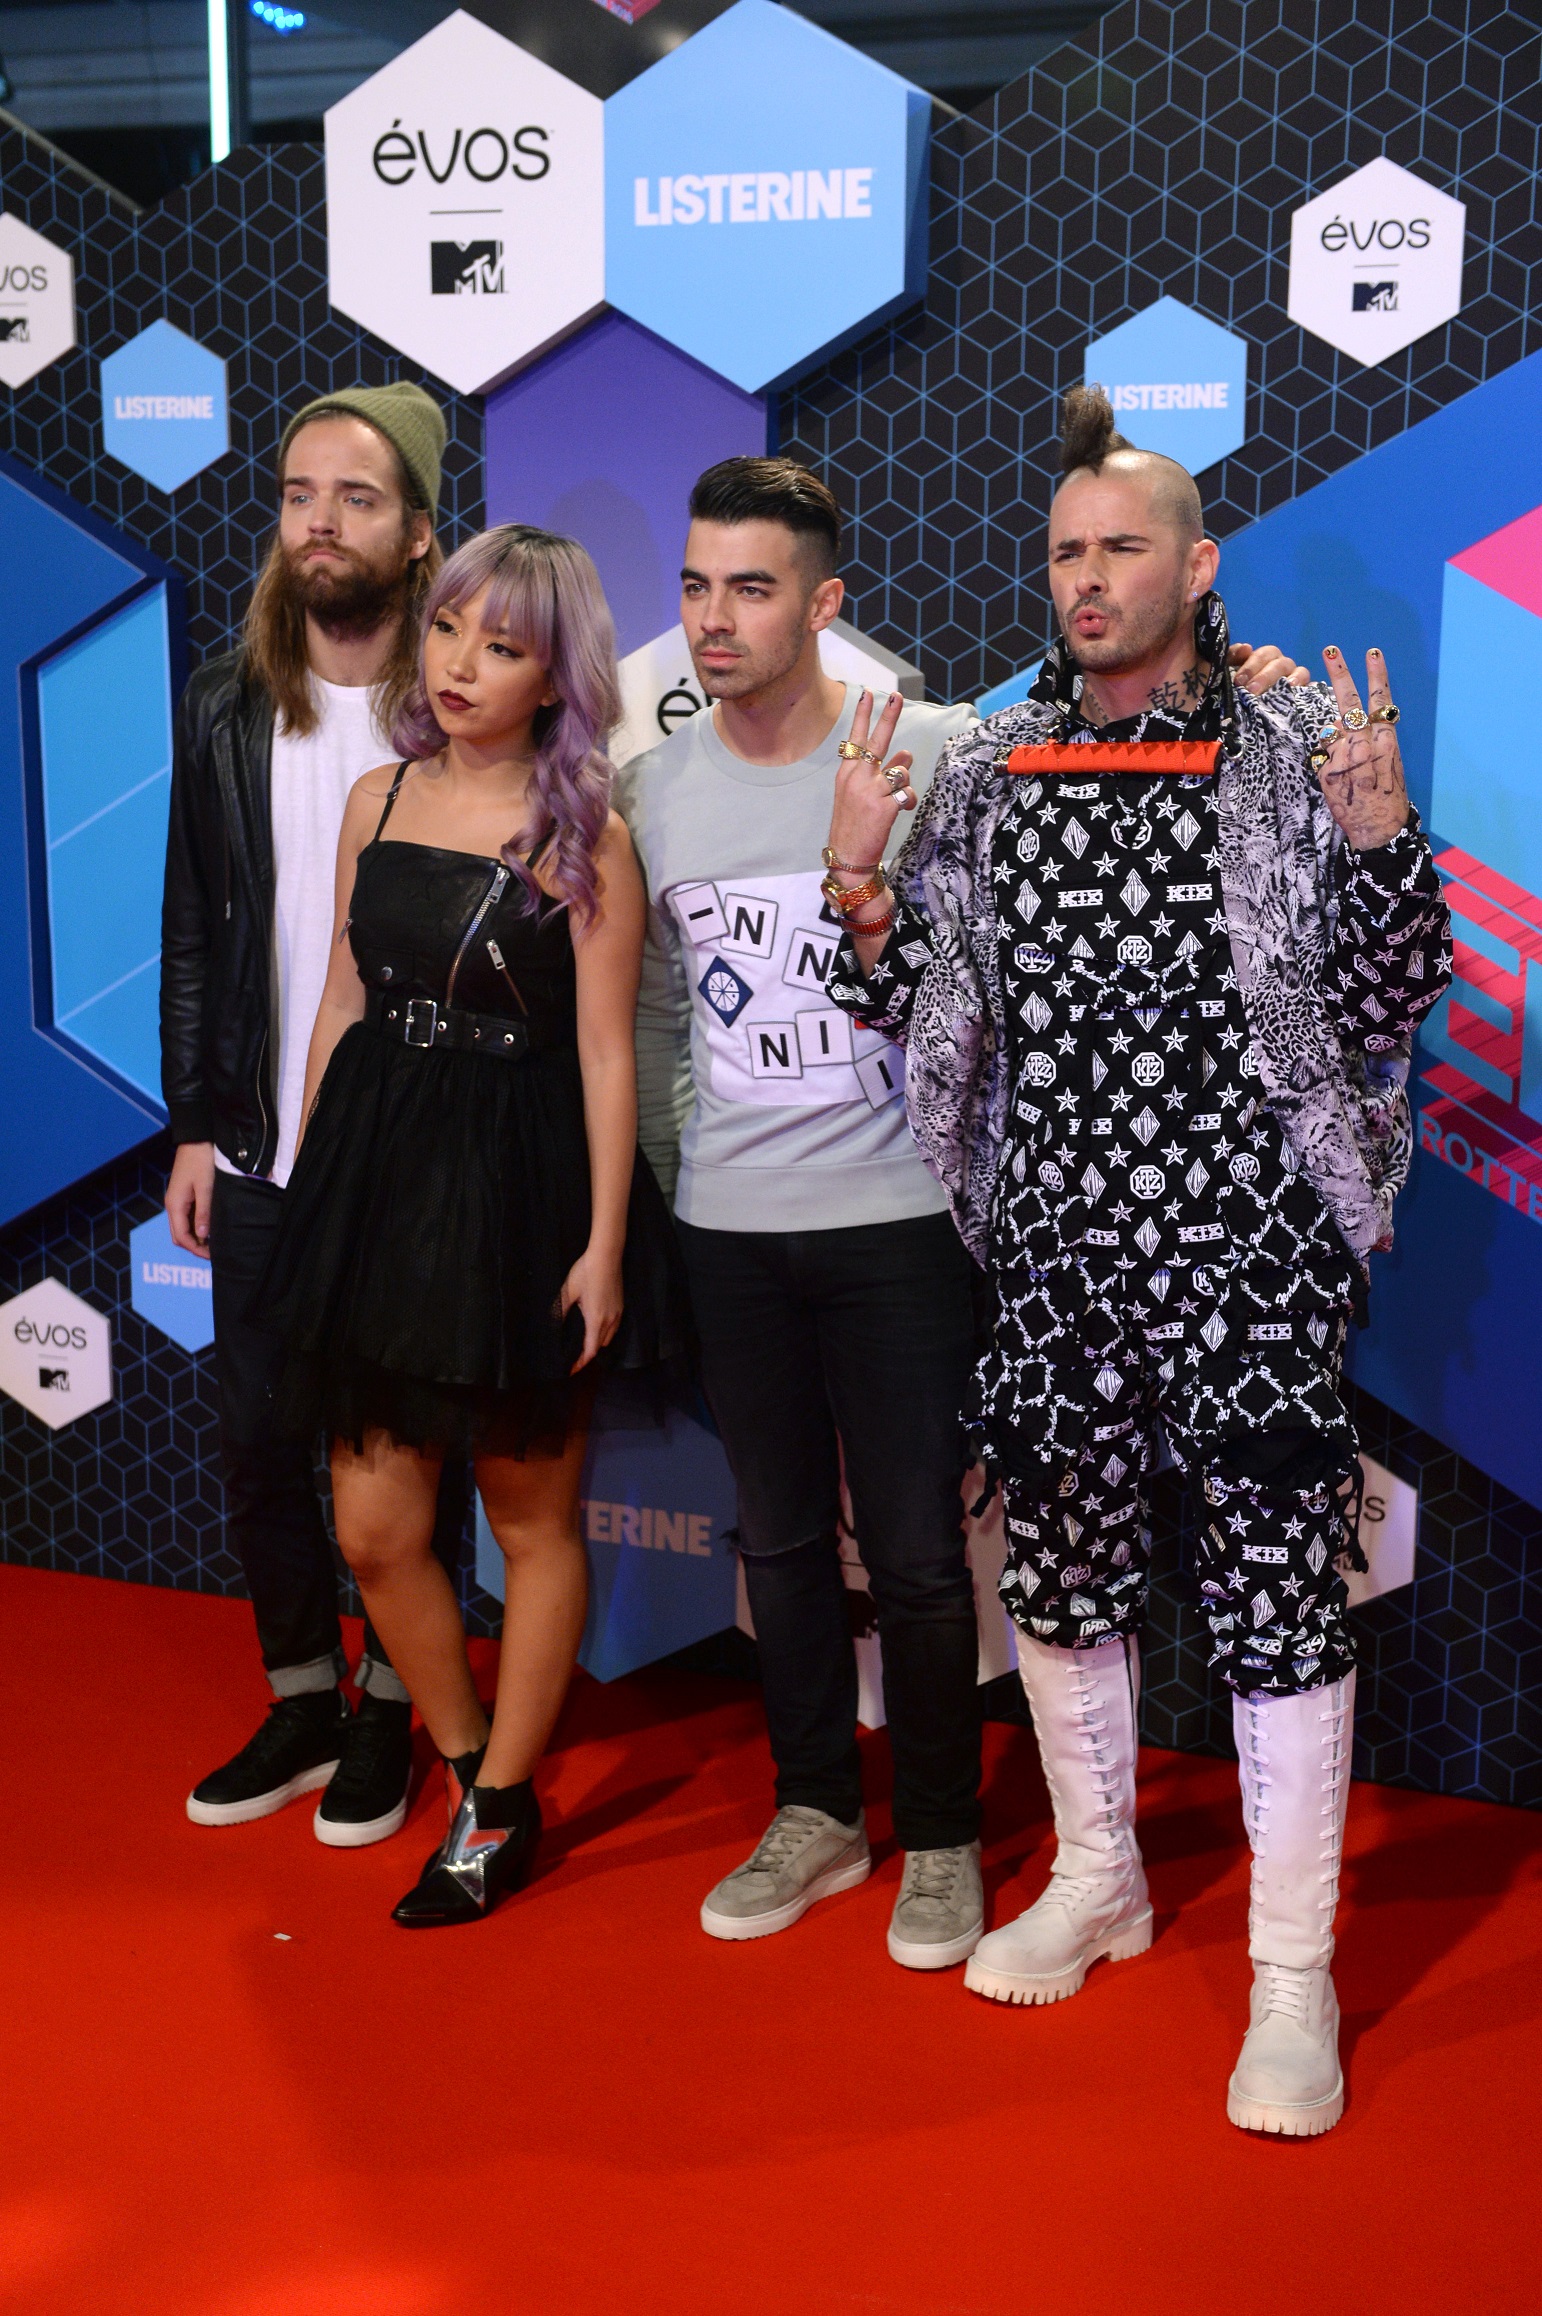 ROTTERDAM, NETHERLANDS - NOVEMBER 06: (L-R) Jack Lawless, JinJoo Lee, Joe Jonas and Cole Whittle of DNCE attend the MTV Europe Music Awards 2016 on November 6, 2016 in Rotterdam, Netherlands. (Photo by Anthony Harvey/Getty Images for MTV)